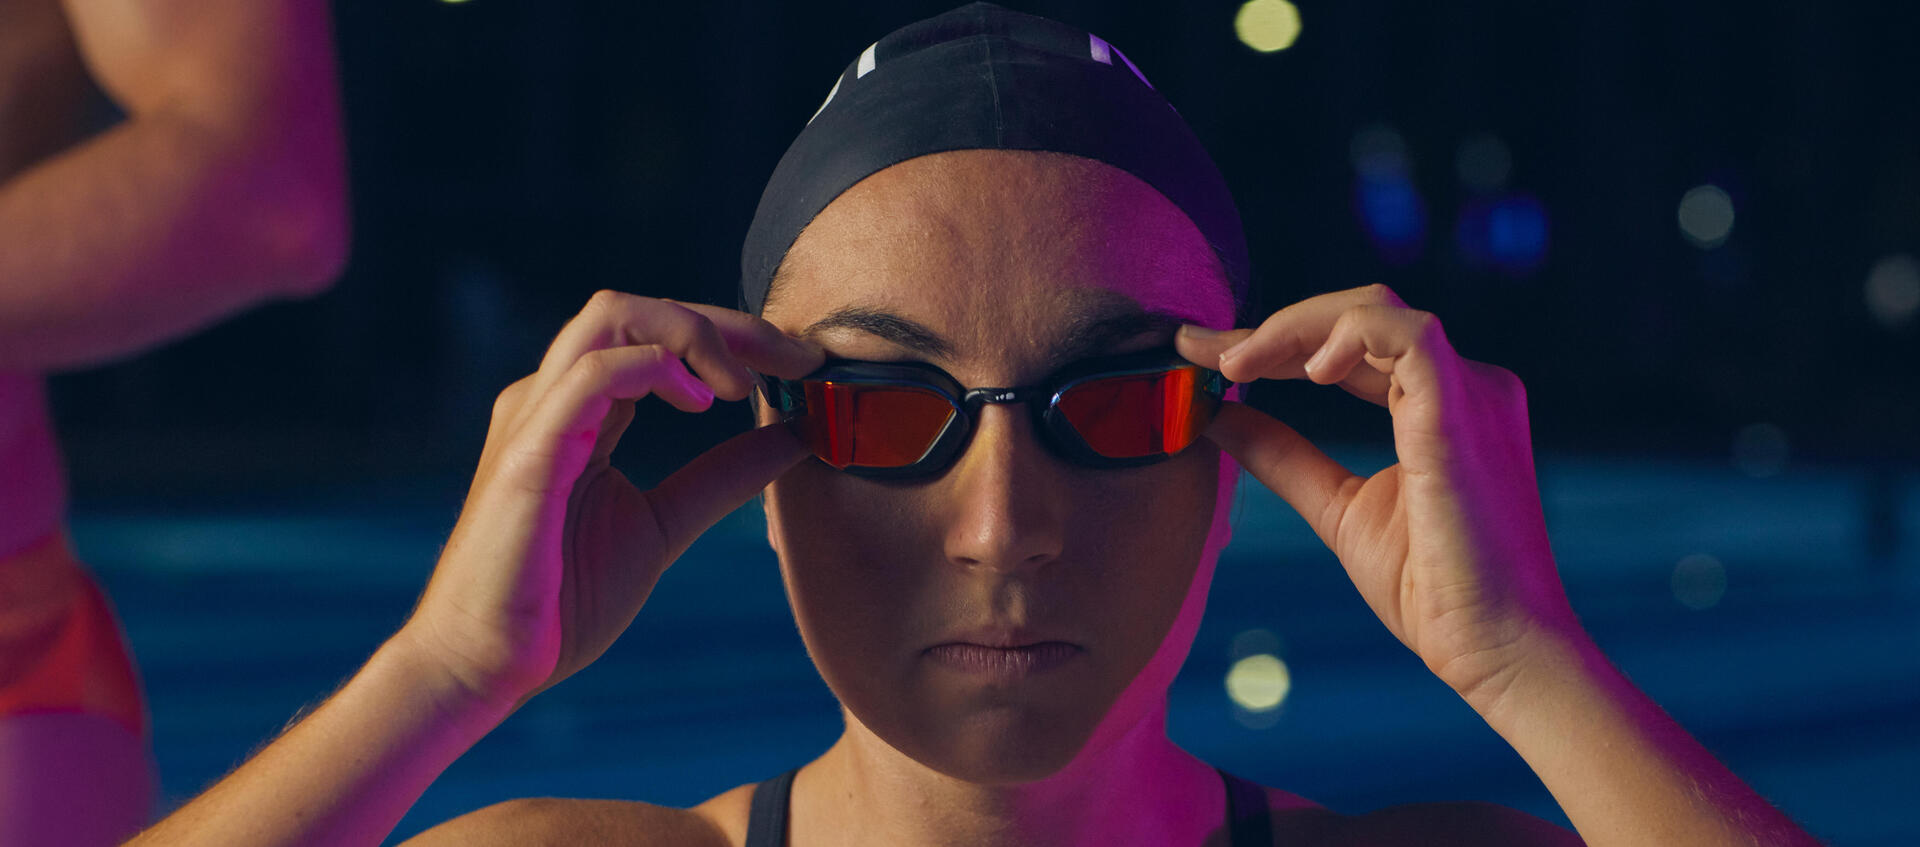 The B-FAST swimming goggles